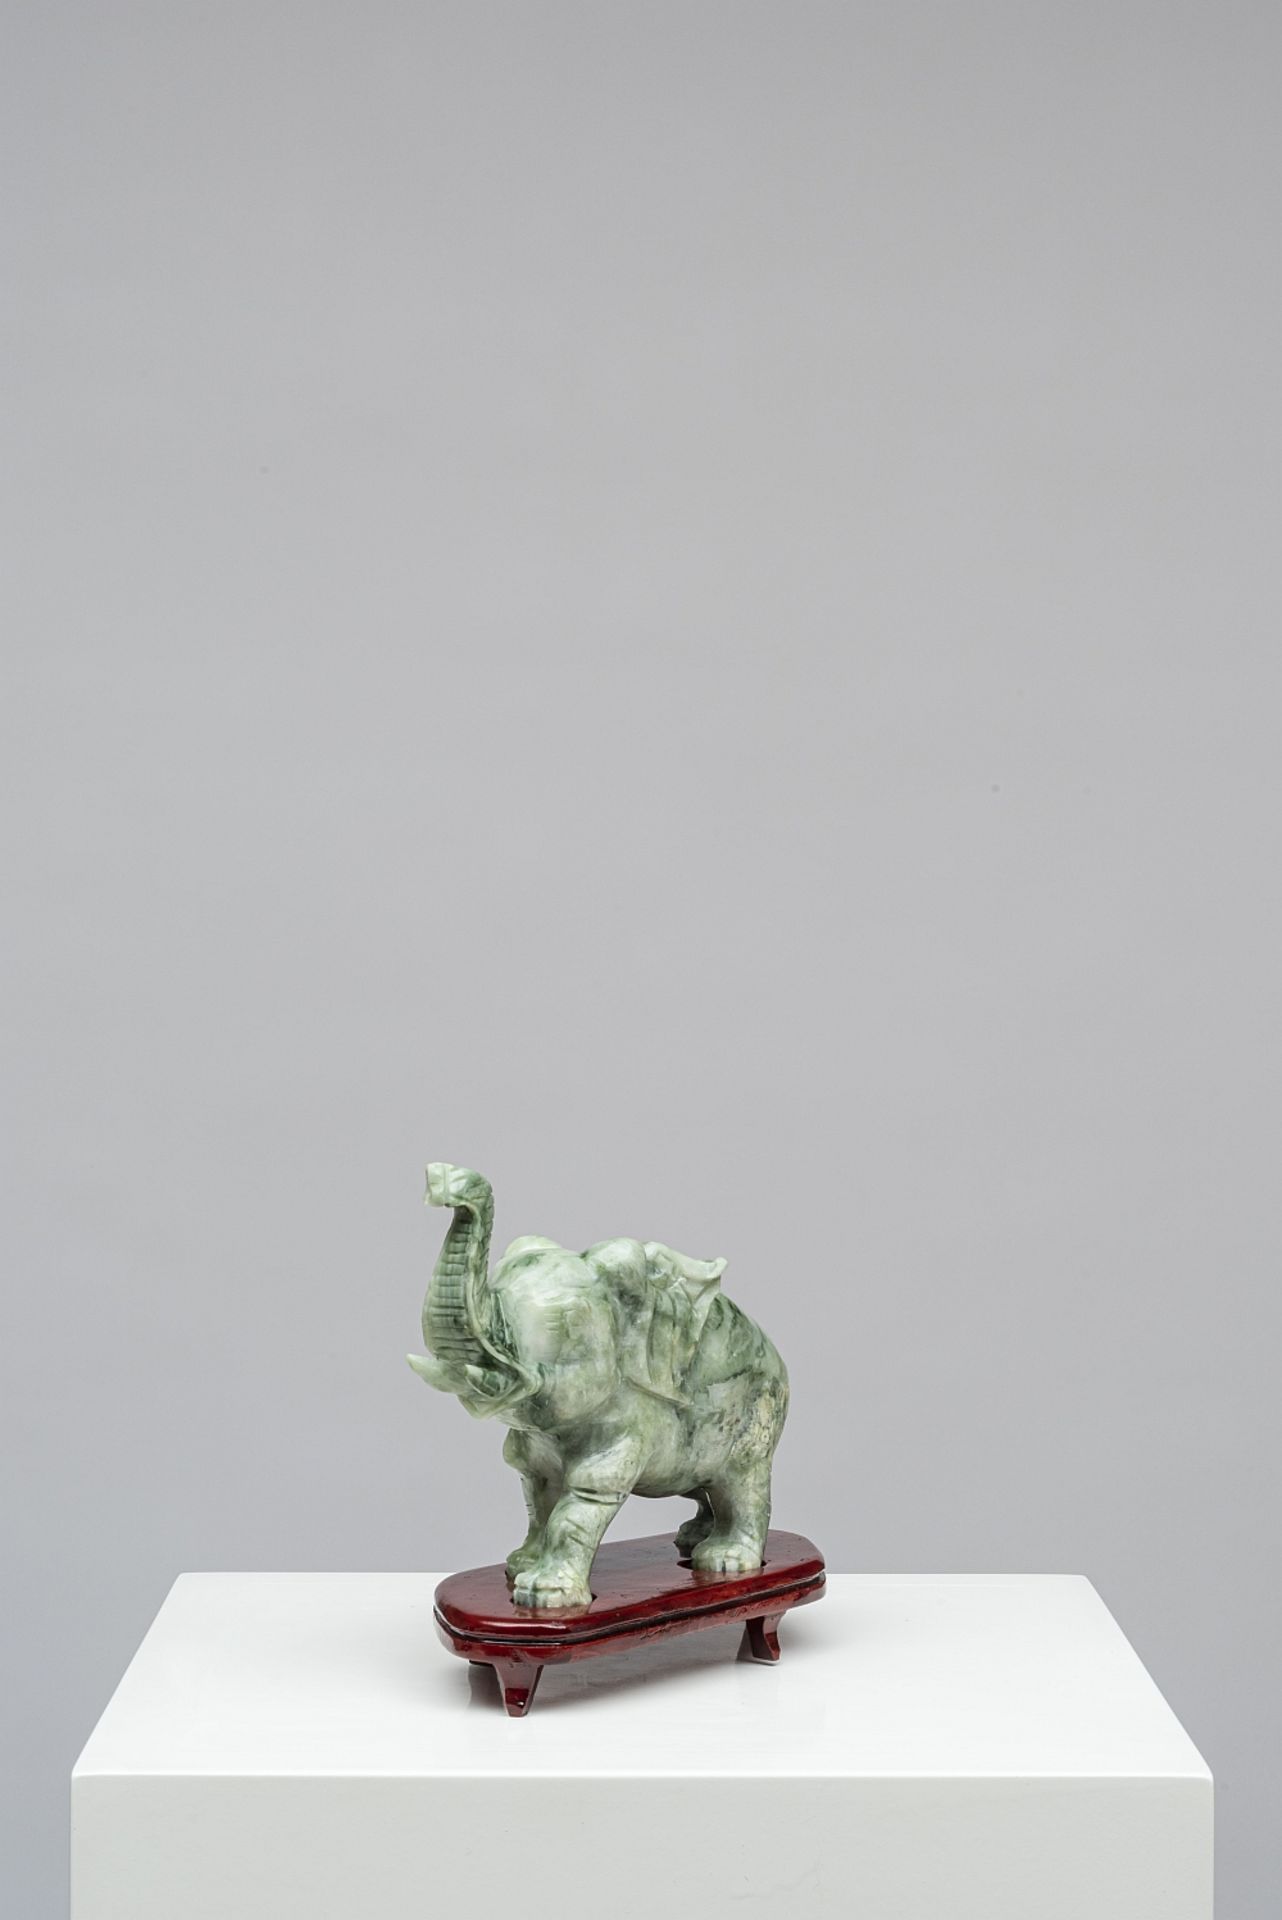 SMALL ELEPHANT ON STAND - Image 3 of 6